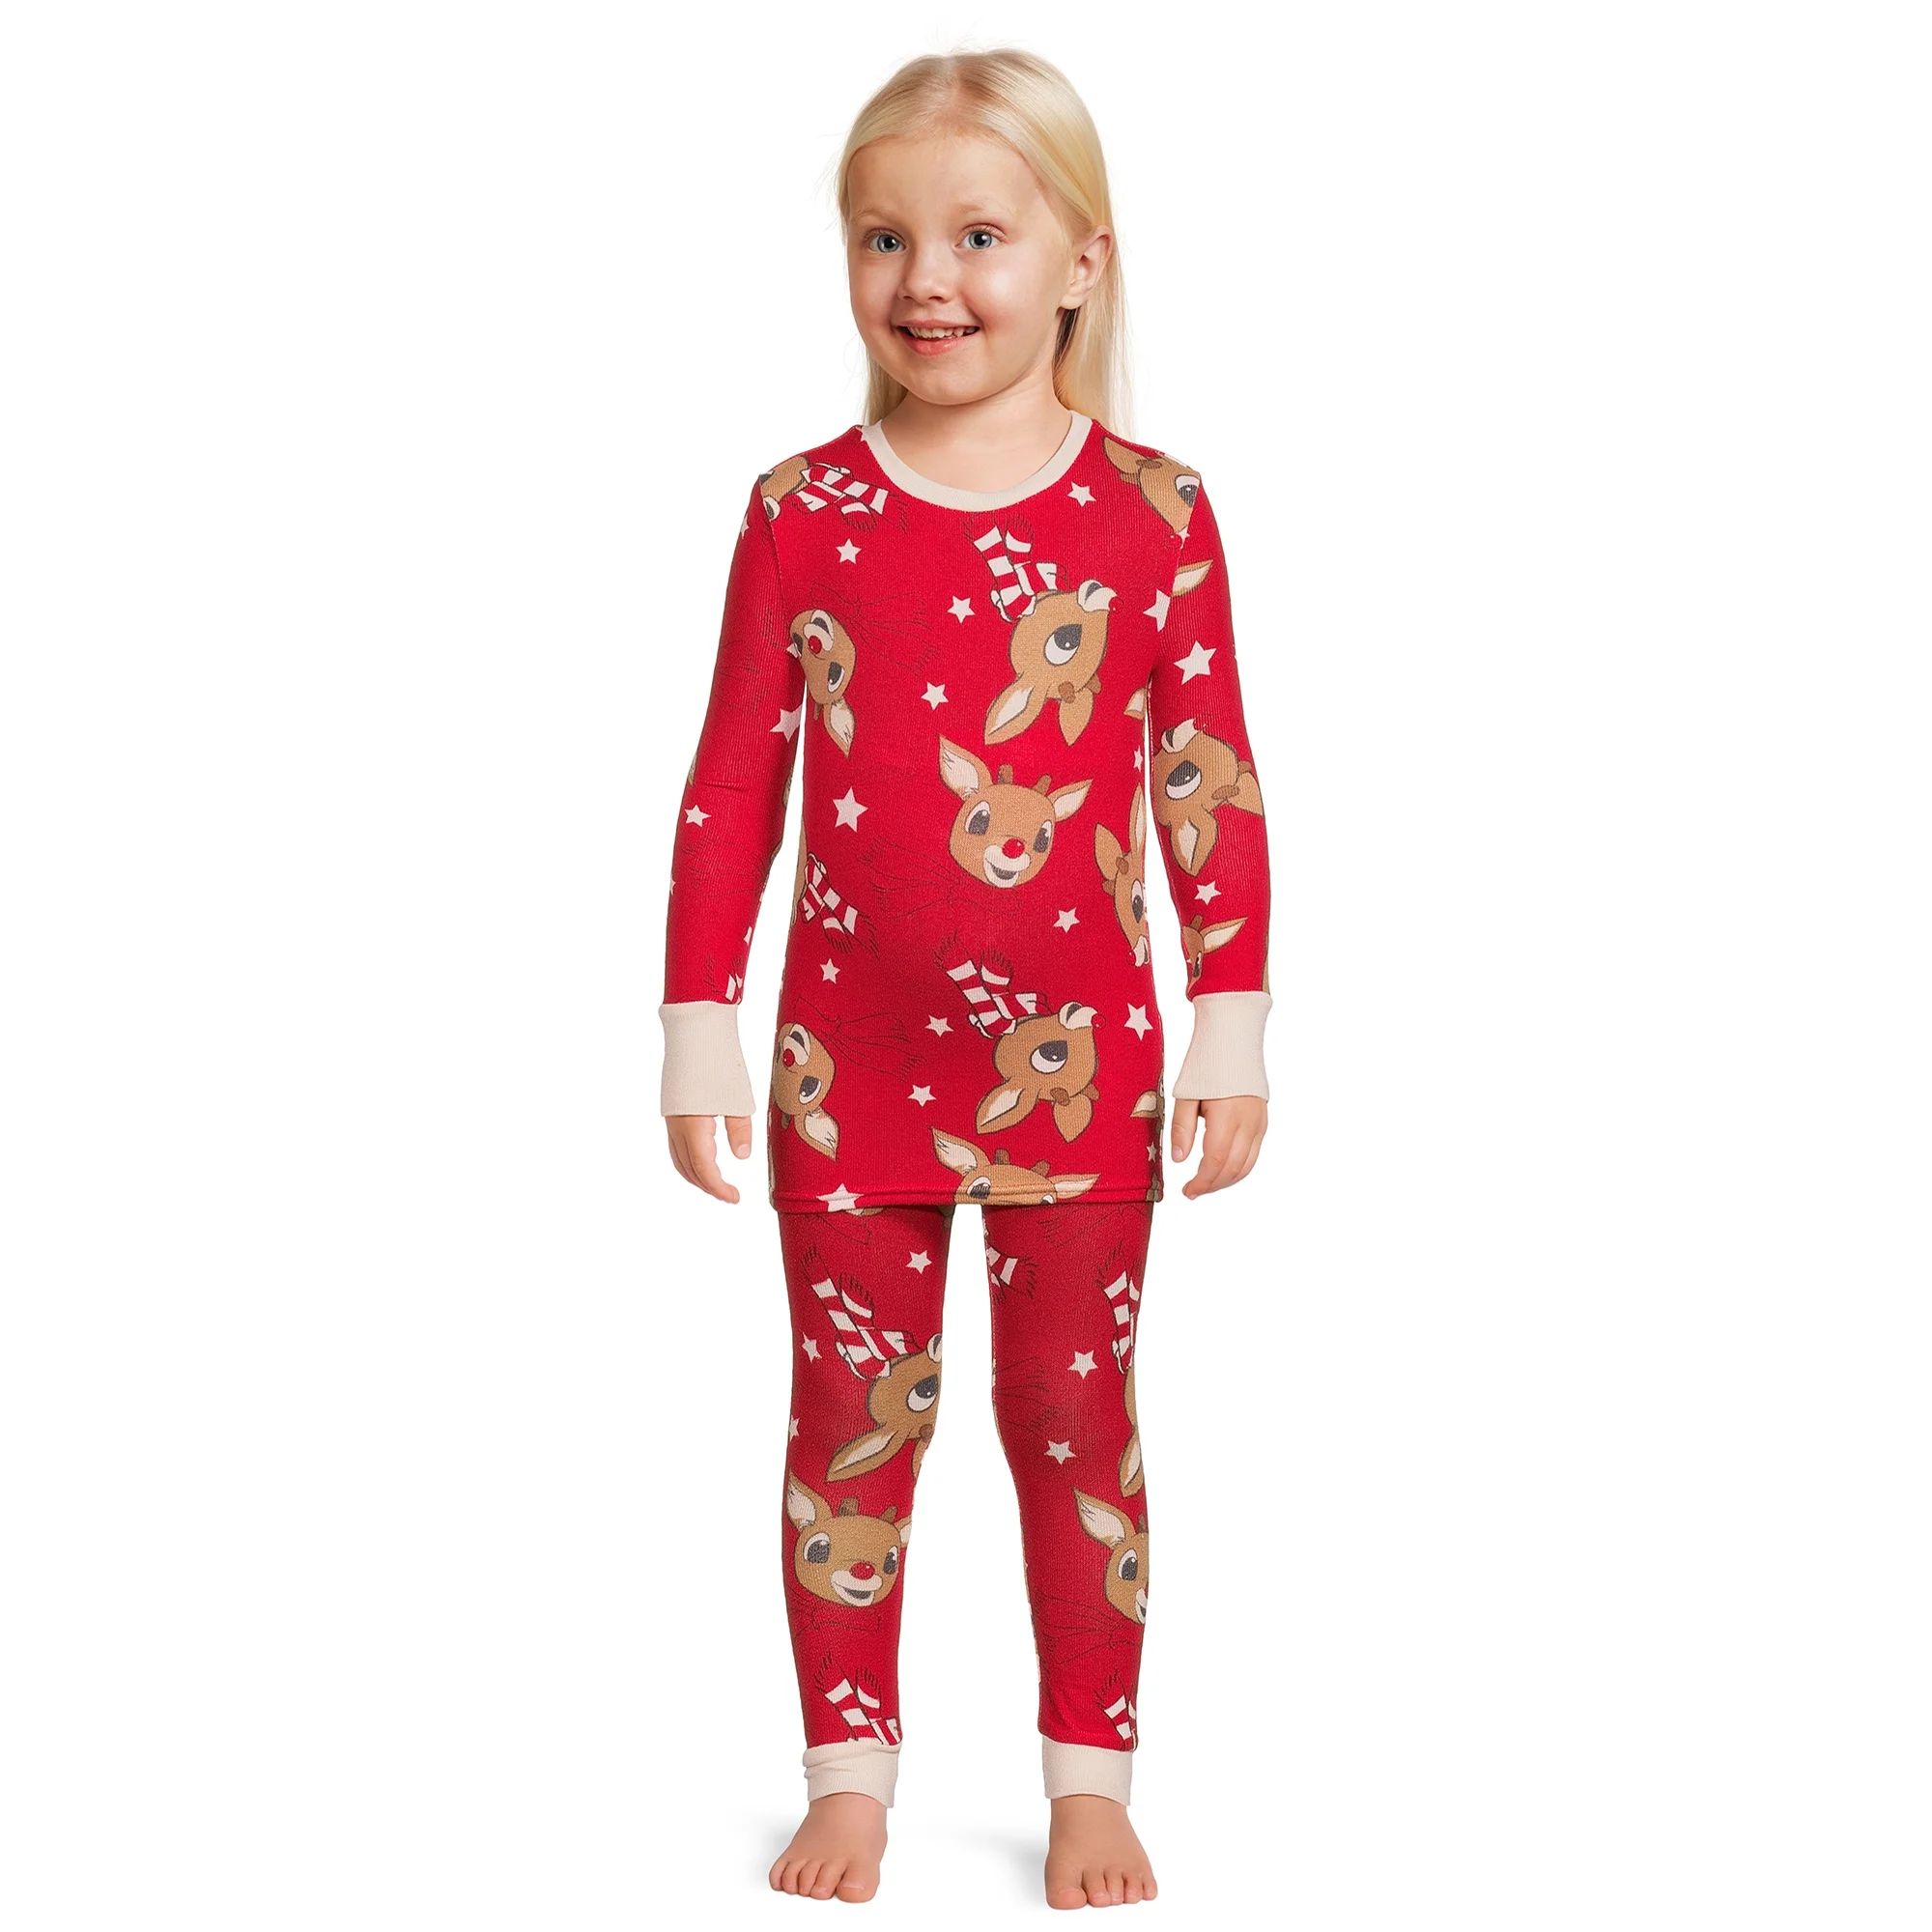 Rudolph the Red Nosed Reindeer Toddler Pajamas and Robe Set, 3-Piece, Sizes 12M-5T | Walmart (US)